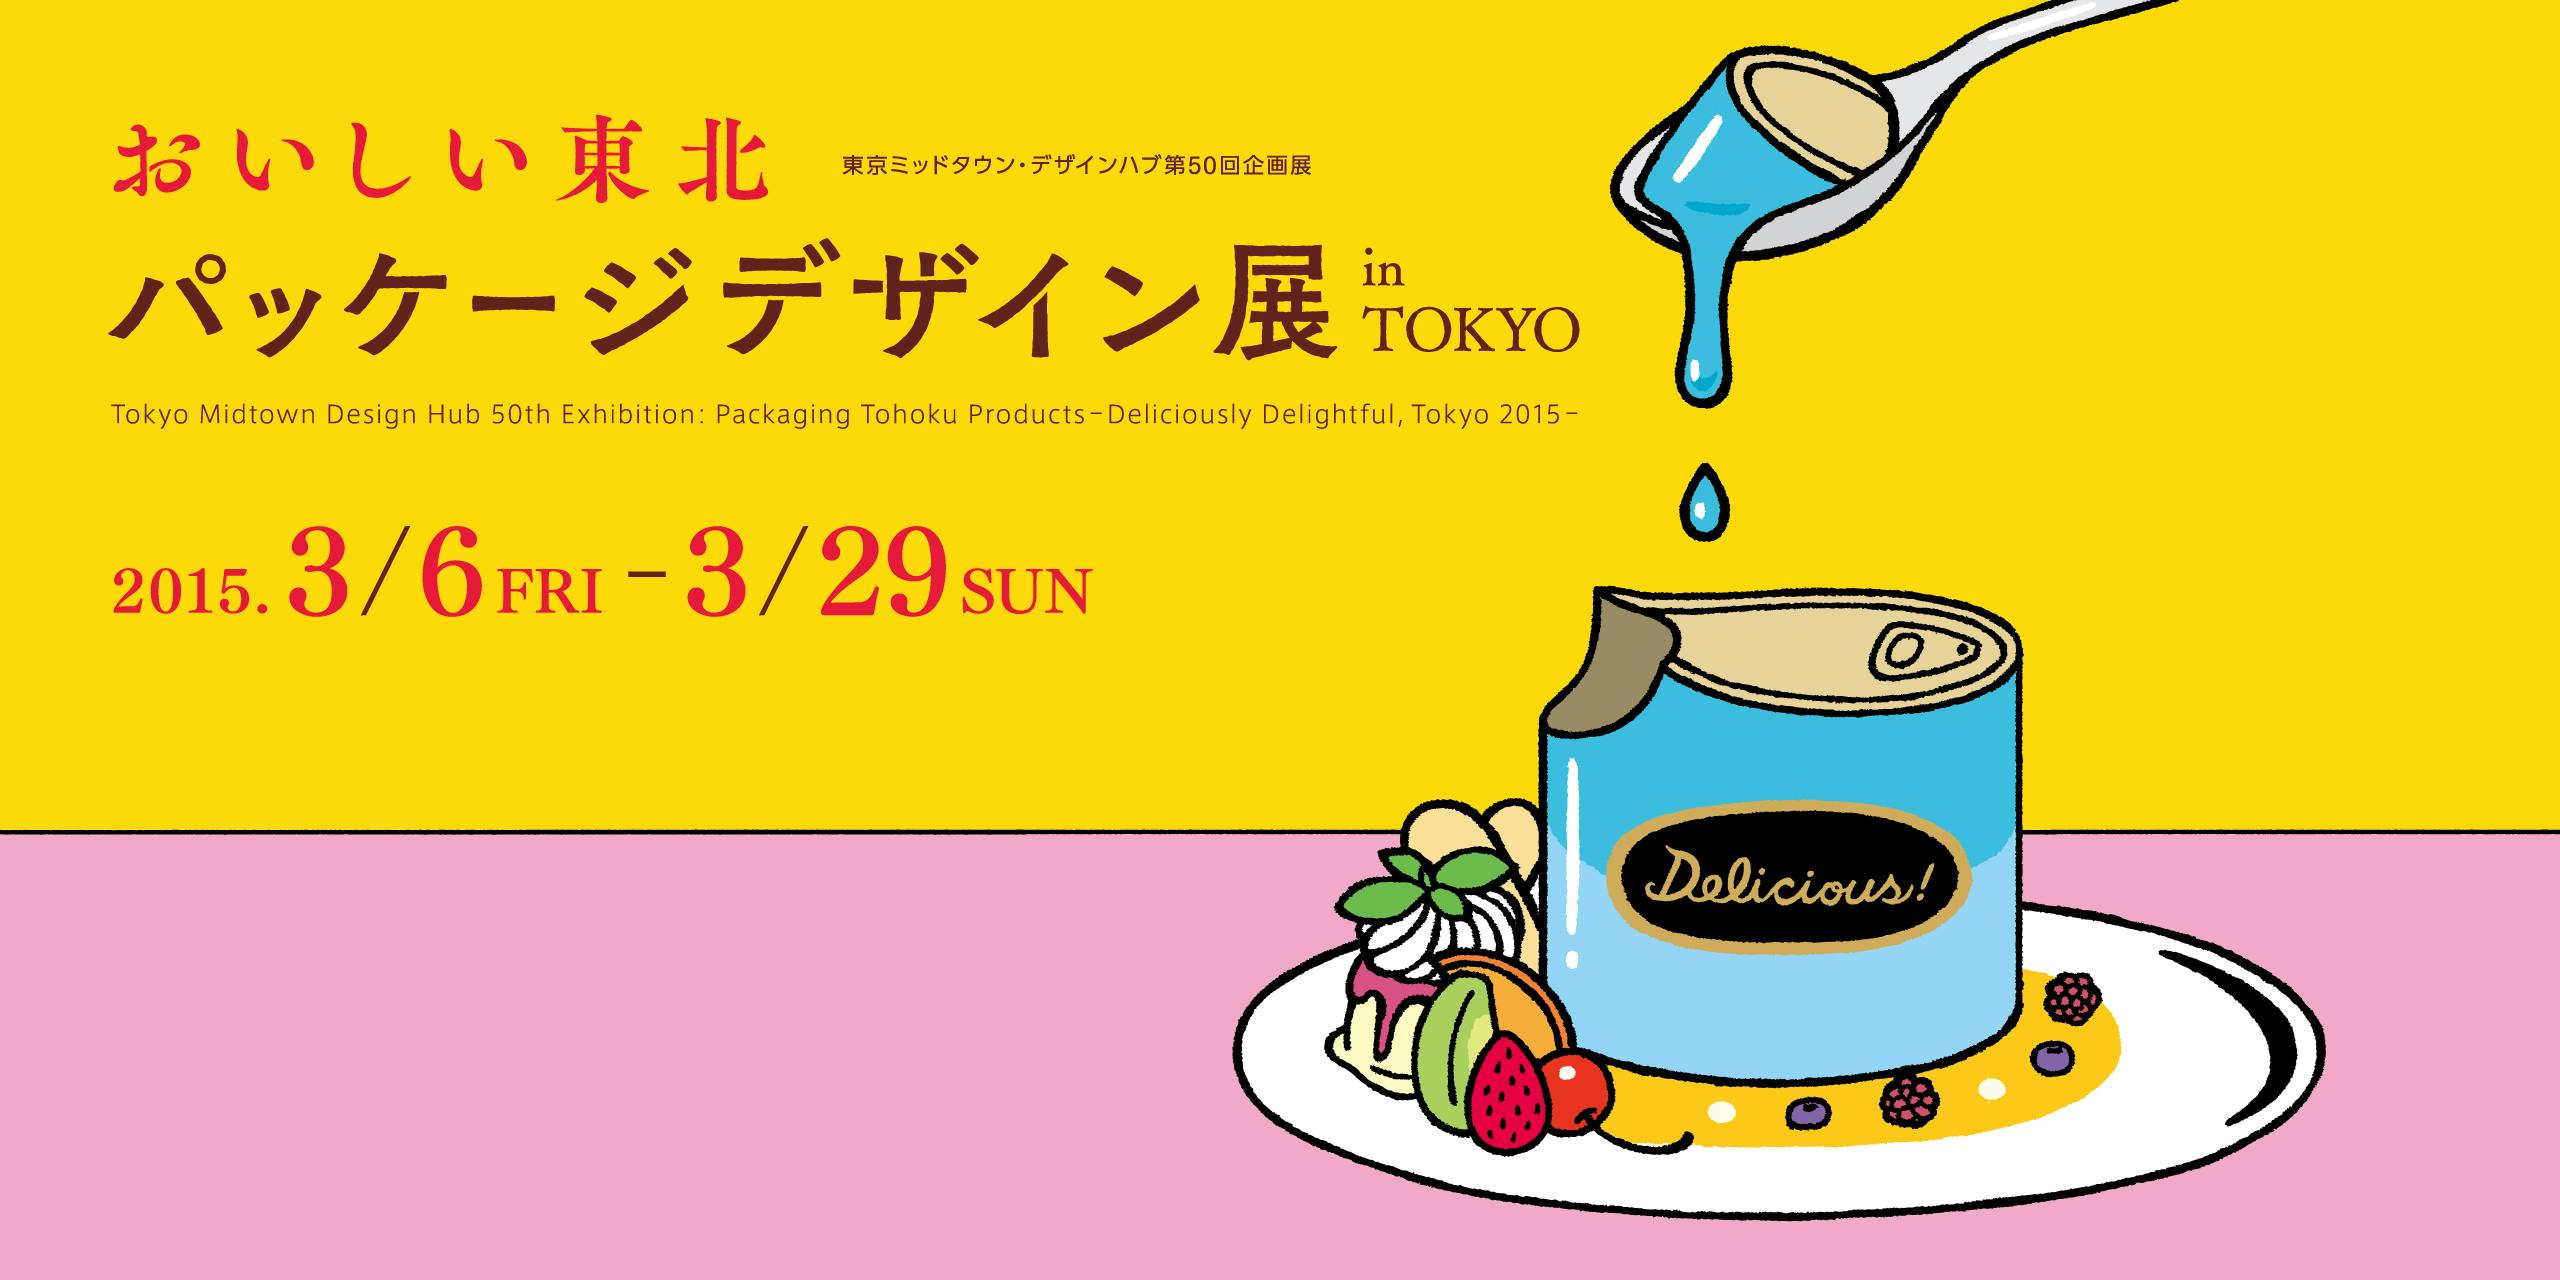 Packaging Tohoku Products – Deliciously Delightful, Tokyo 2015 –